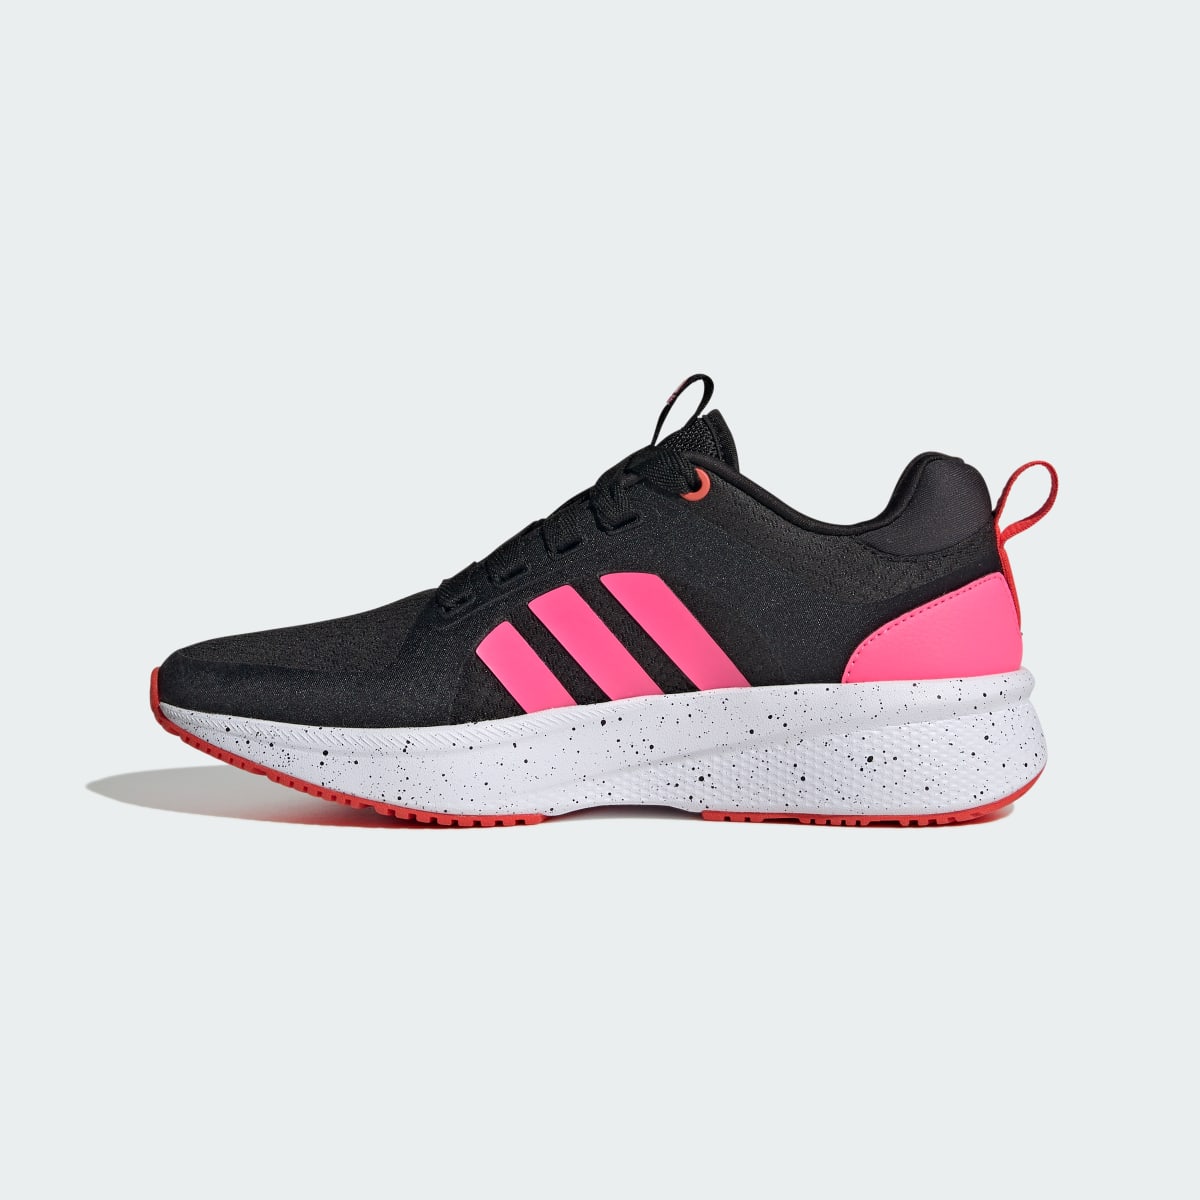 Adidas Edge Lux 6.0 Shoes. 7